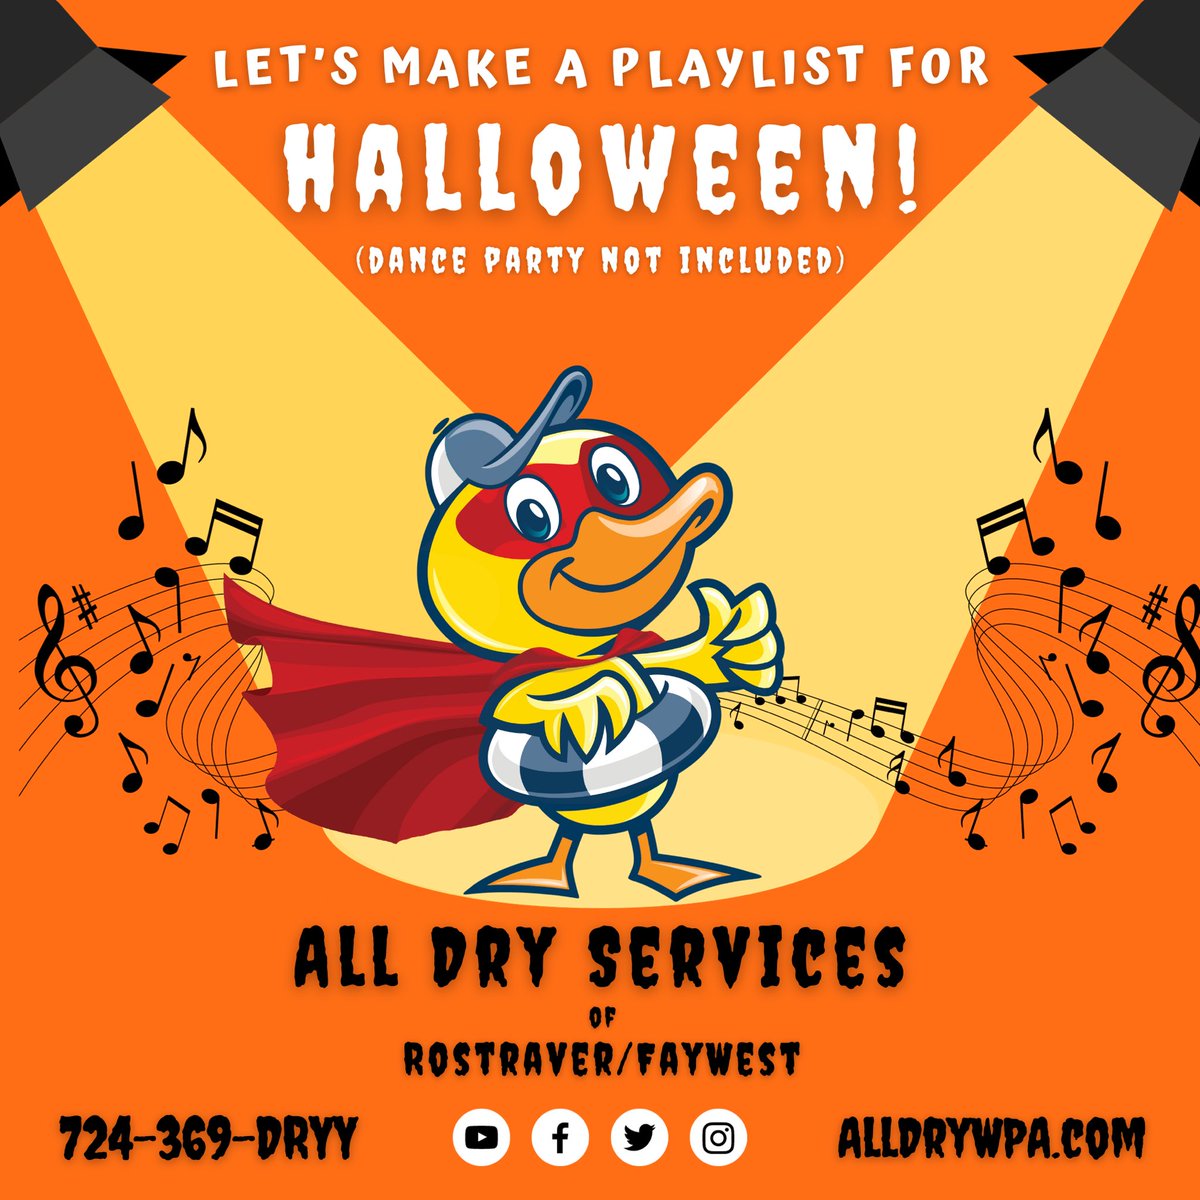 Wanna start the festivities early today? Drop a title or link below with your favorite spooky season tunes! 🎃👻😎

#TeamPuddles #DUCKSTRONG #westmorelandcounty #MonValley #fayettecounty #Halloween #halloween2023 #candycorn #playlist #halloweenplaylist #MusicLovers #favoritesong